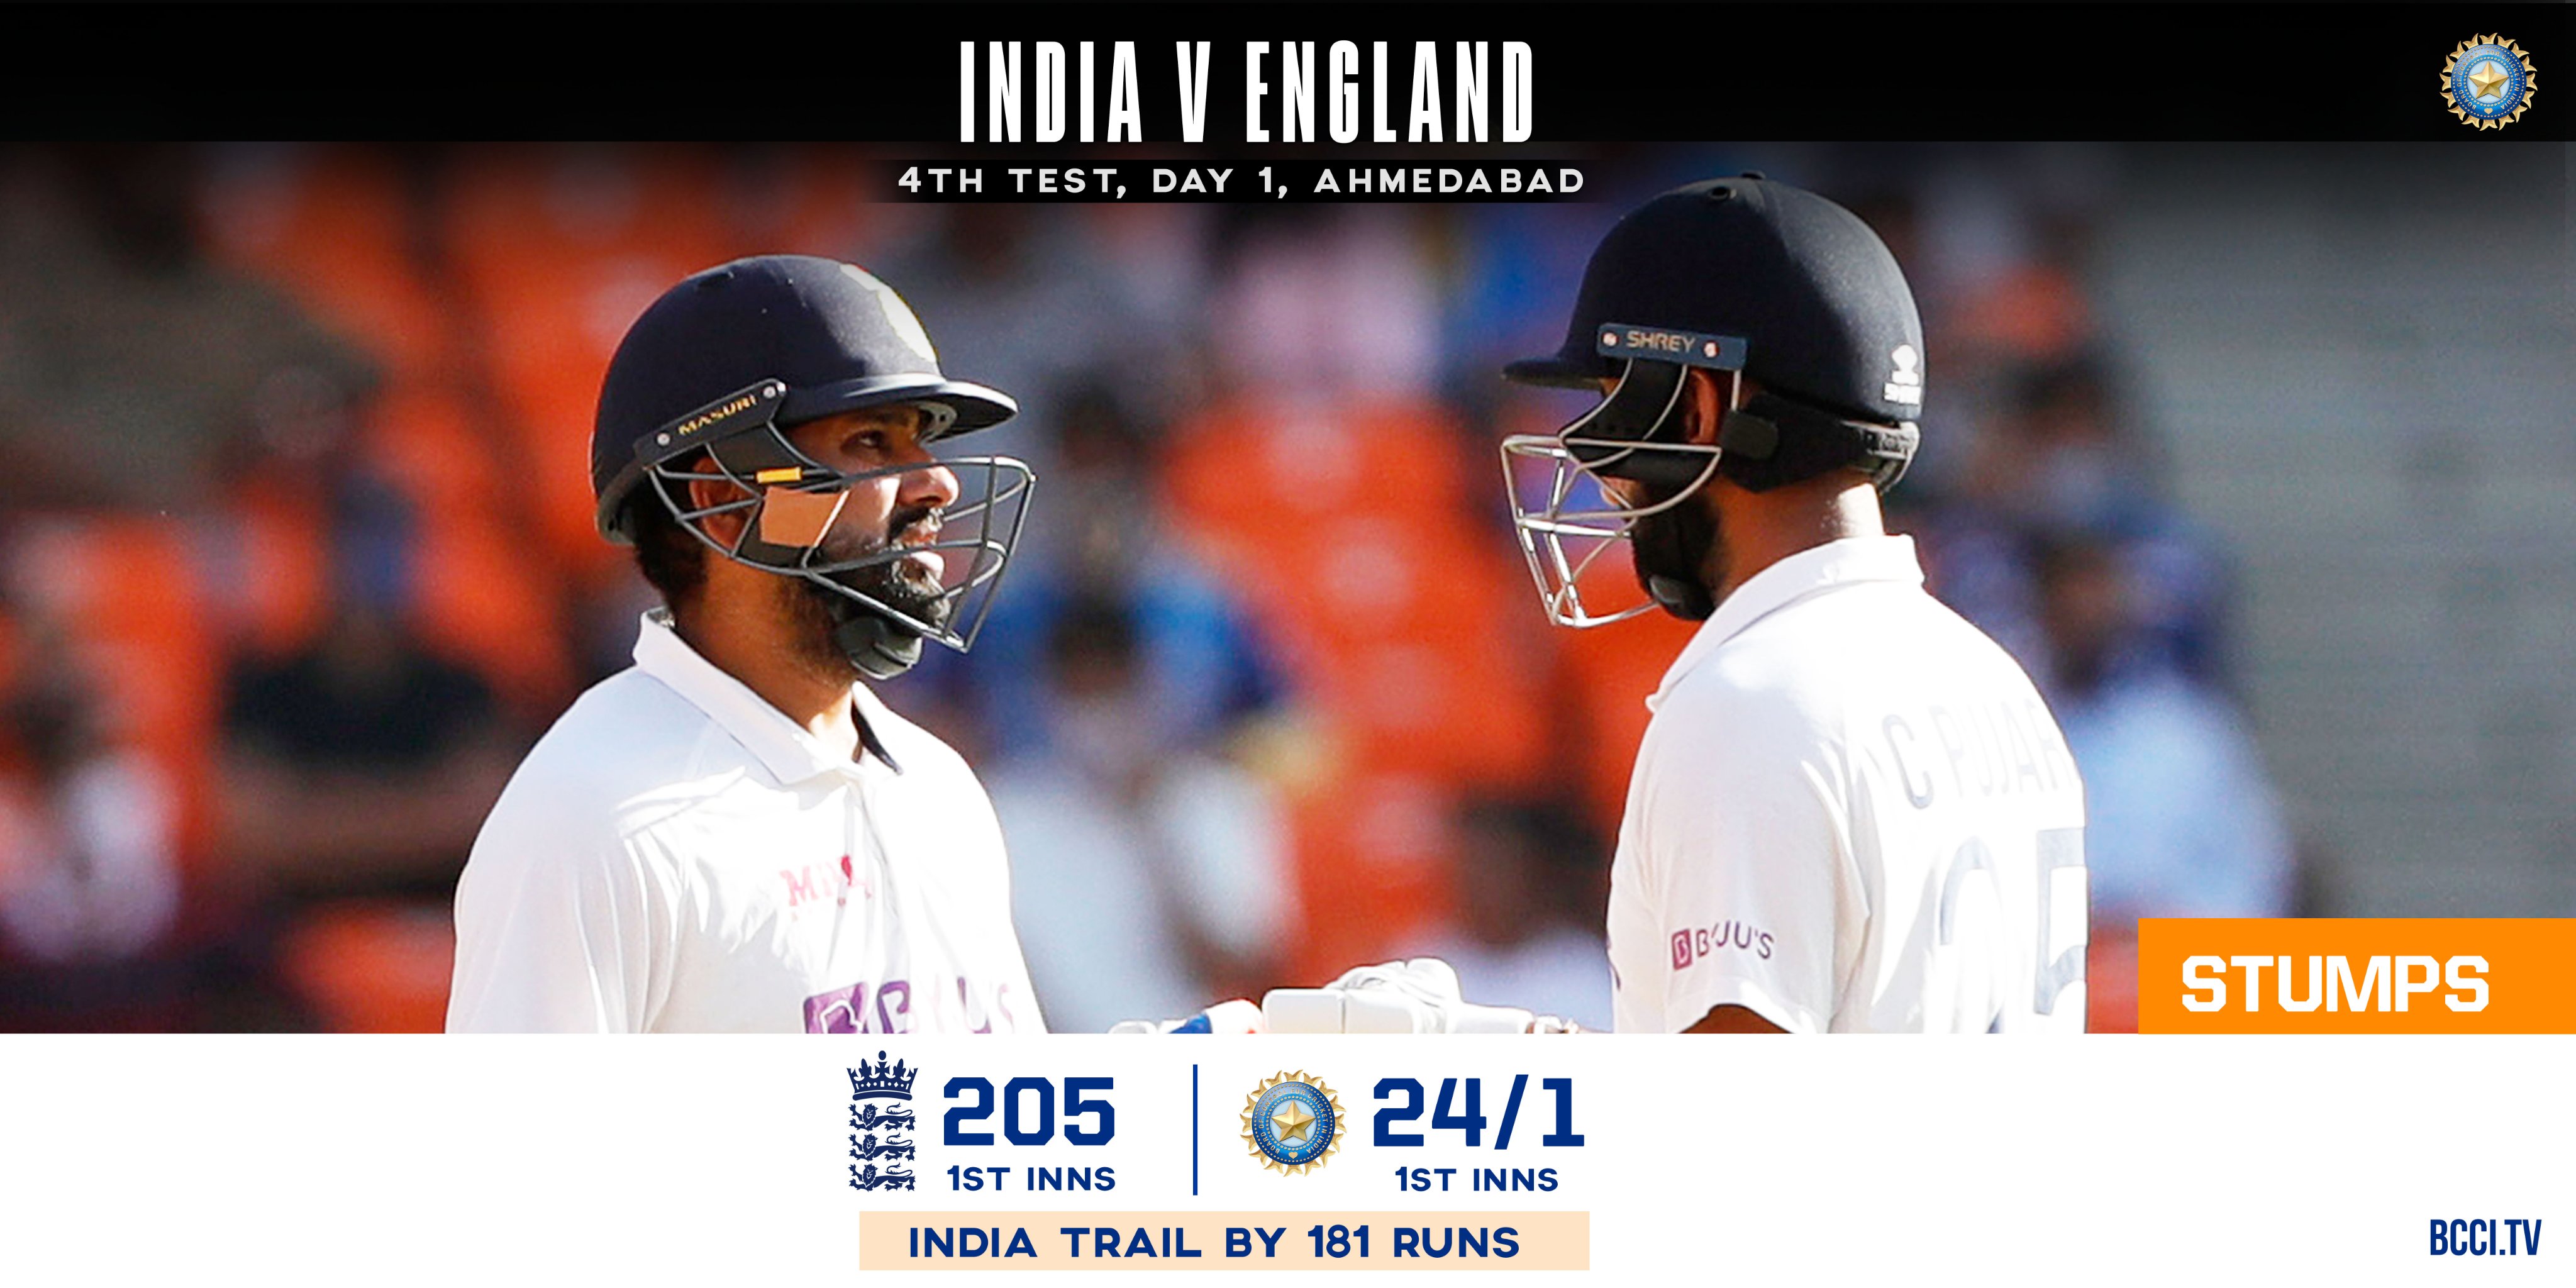 Ind vs Eng 4th Test, Day 1: India and England continue to disappoint viewers with low scores